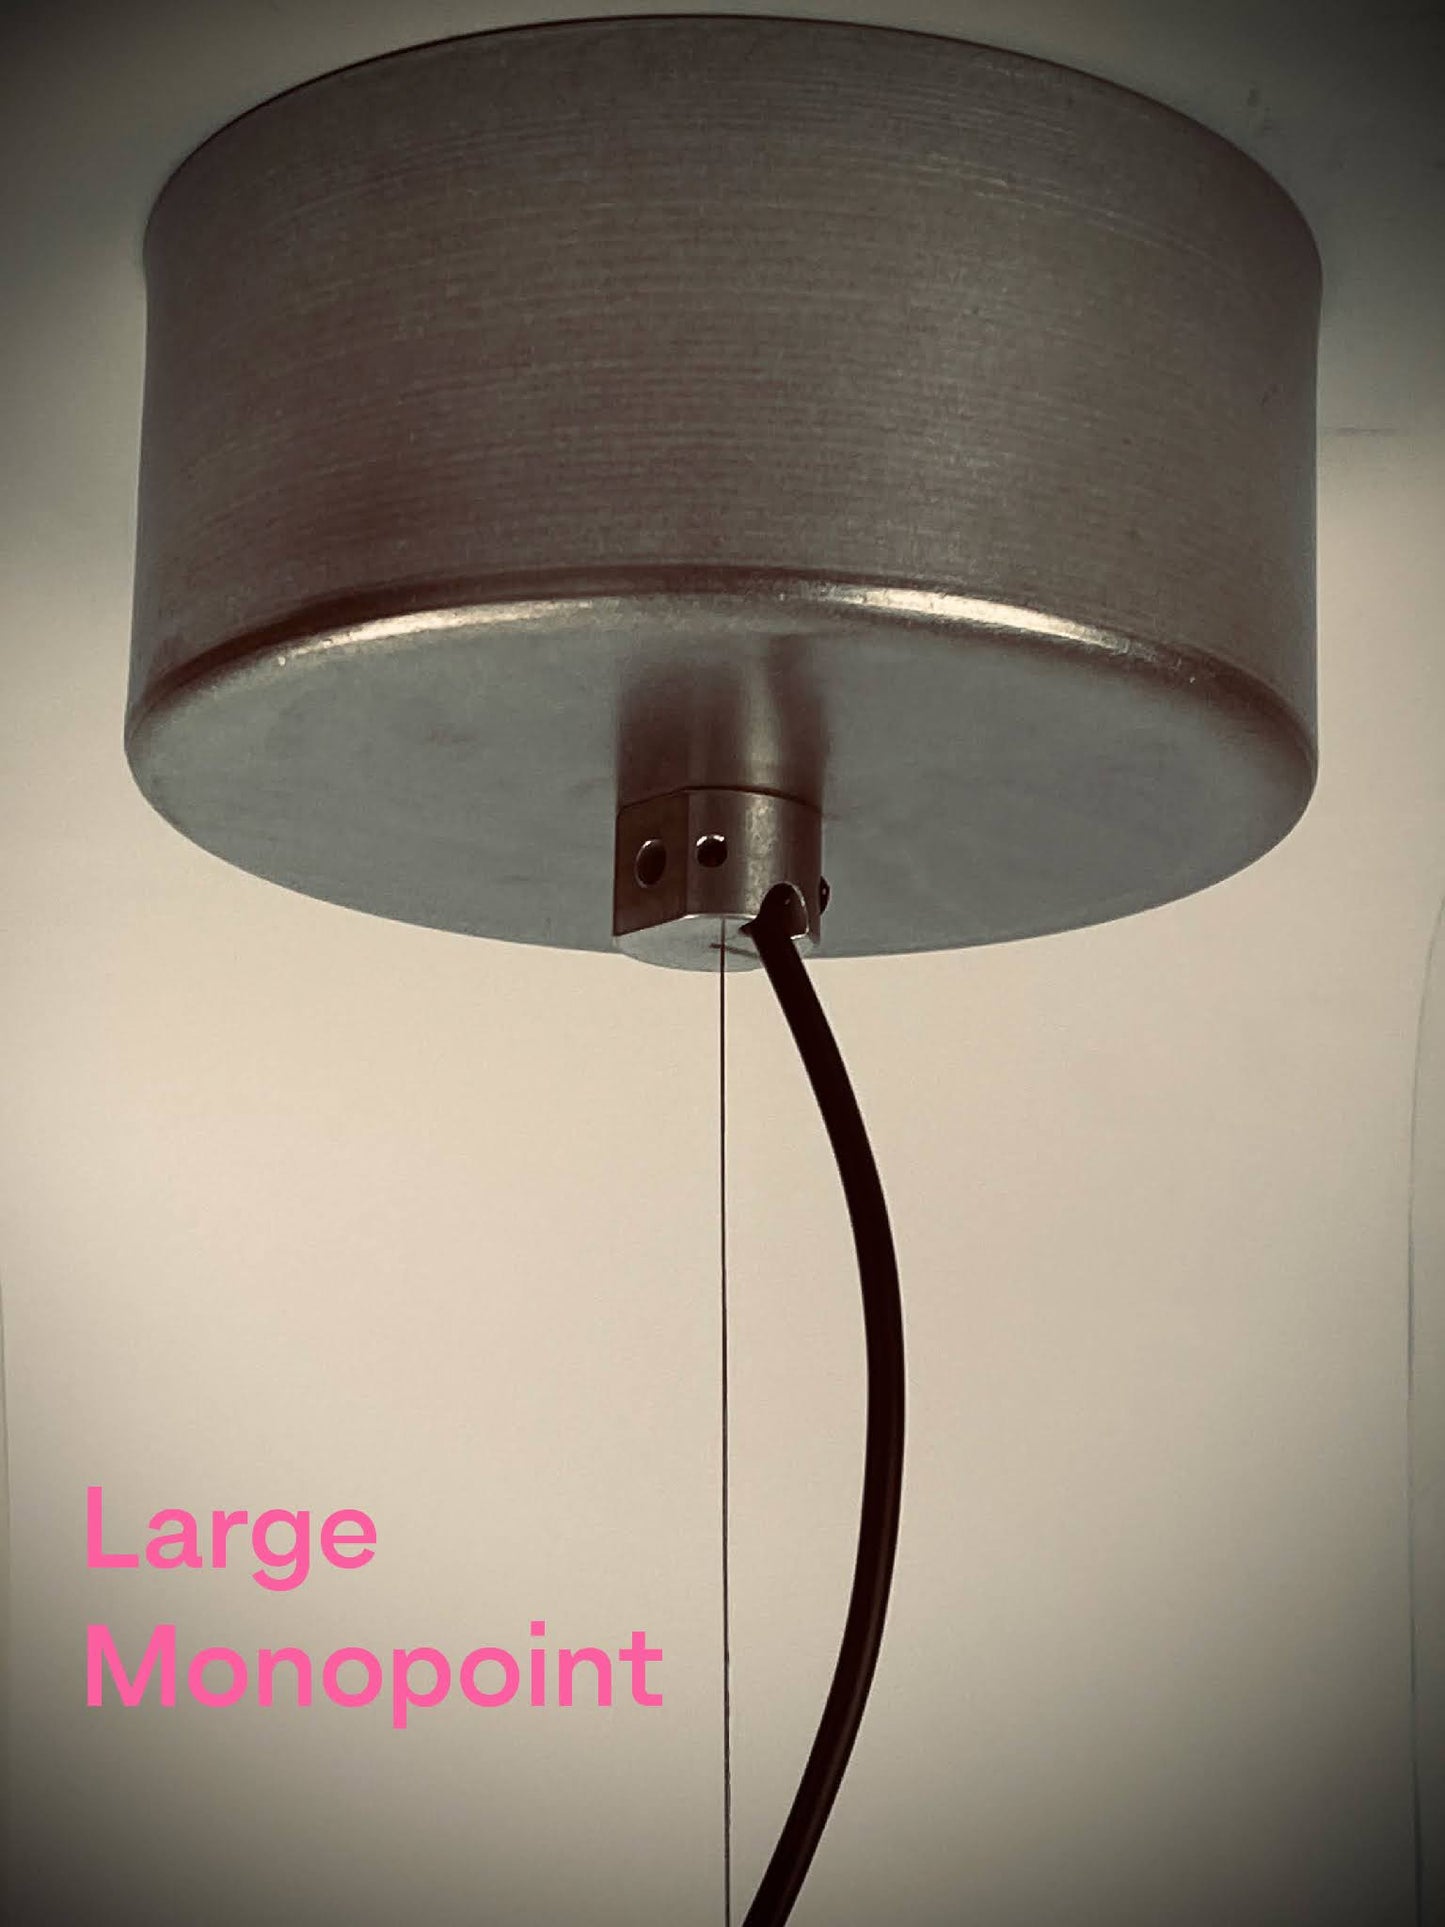 Installed large monopoint for a budget architectural spotlight that was designed for circular economy